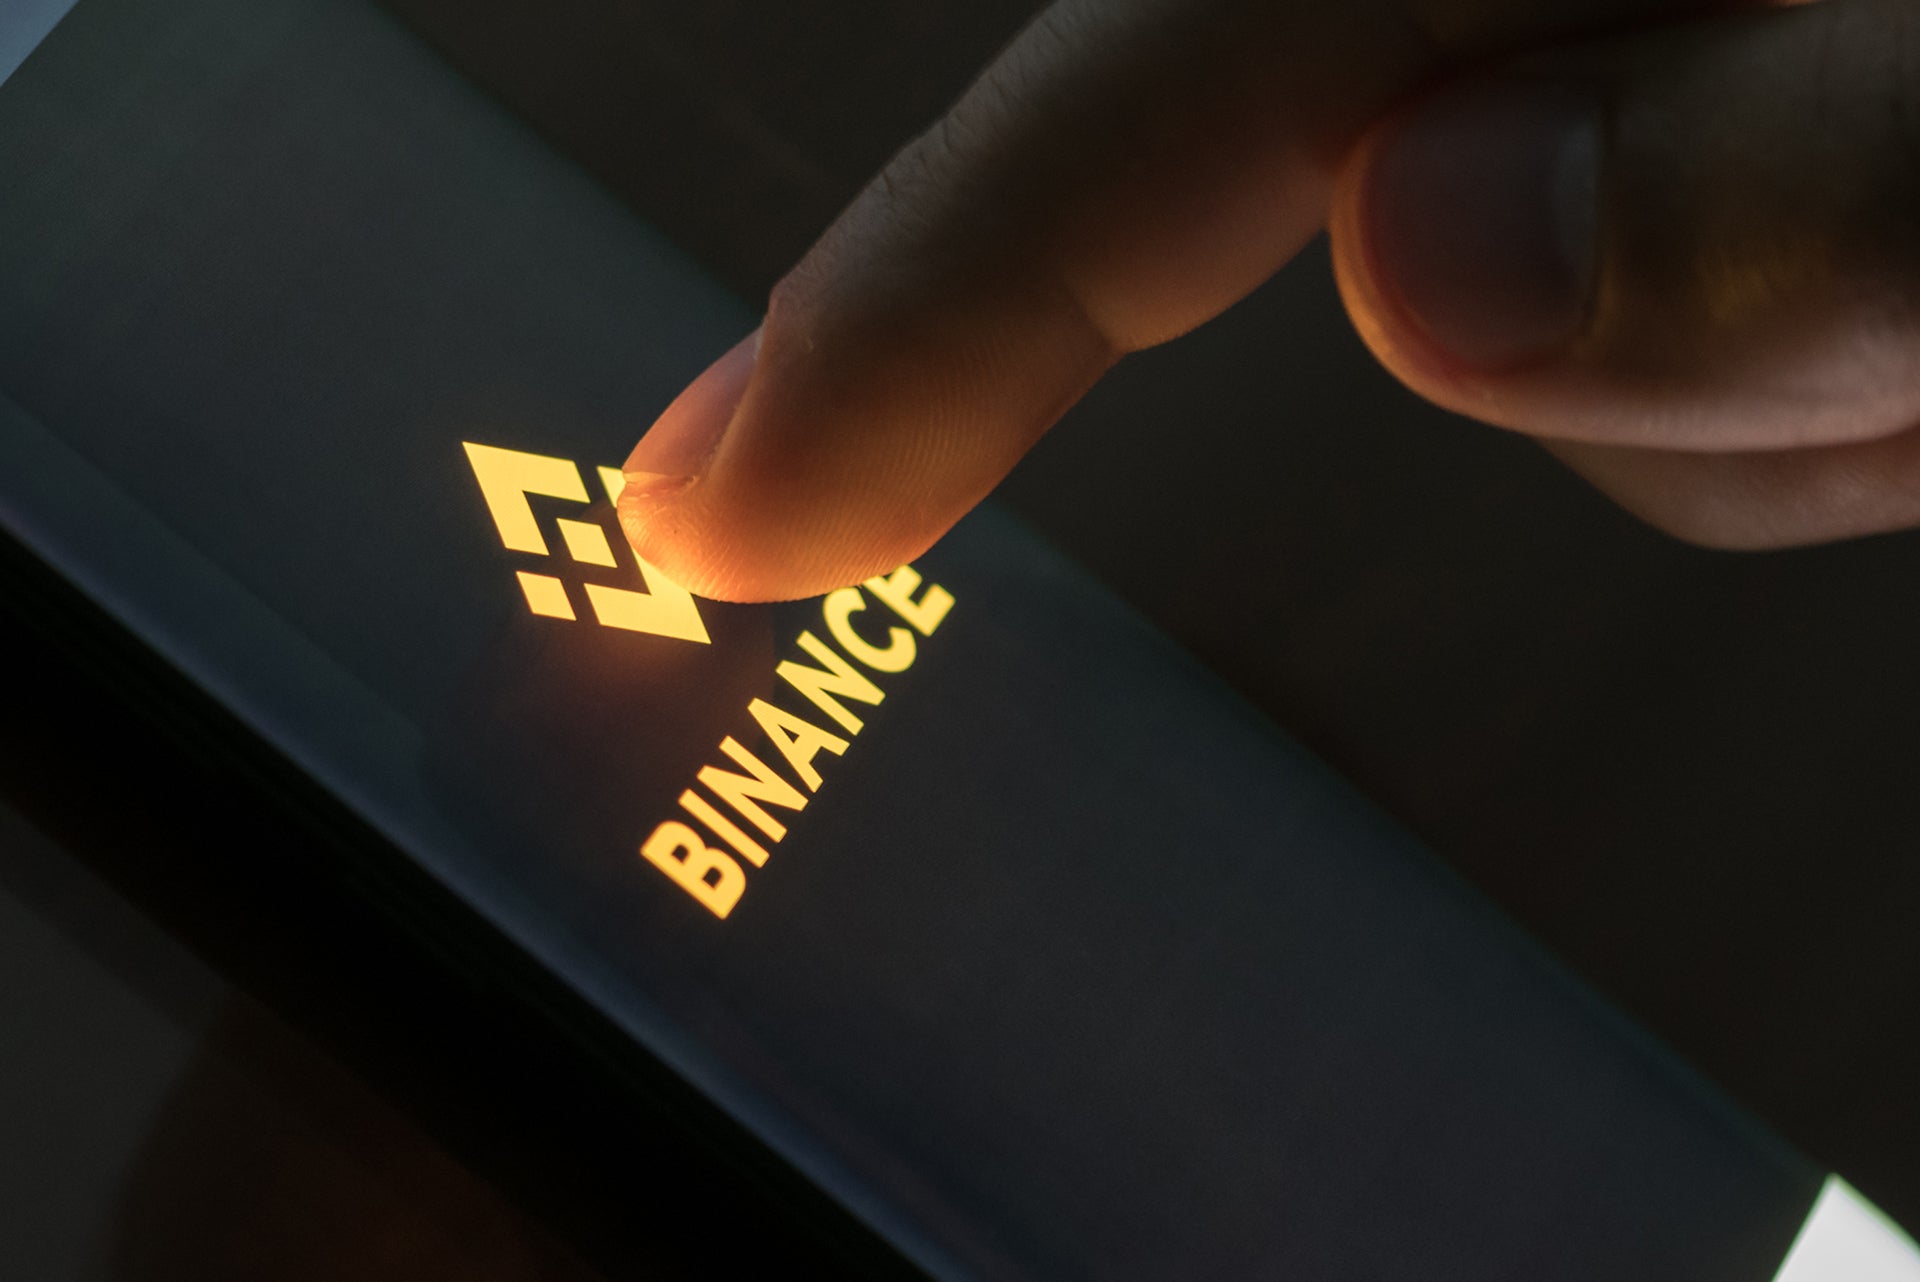 Binance quietly resumes GBP withdrawals